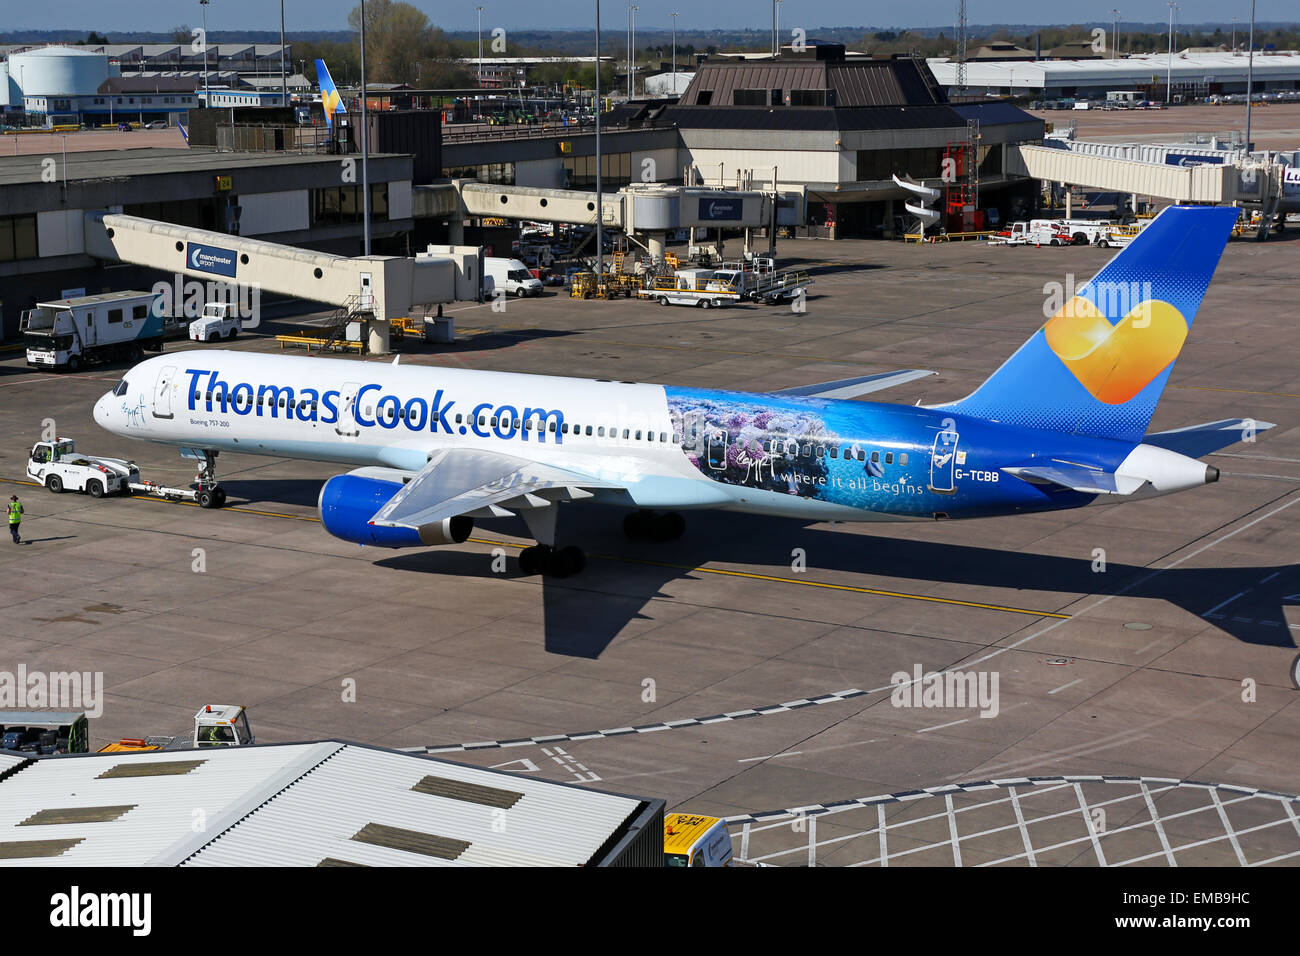 Thomas Cook Boeing 757-200 prepares for boarding at Manchester airport. Stock Photo